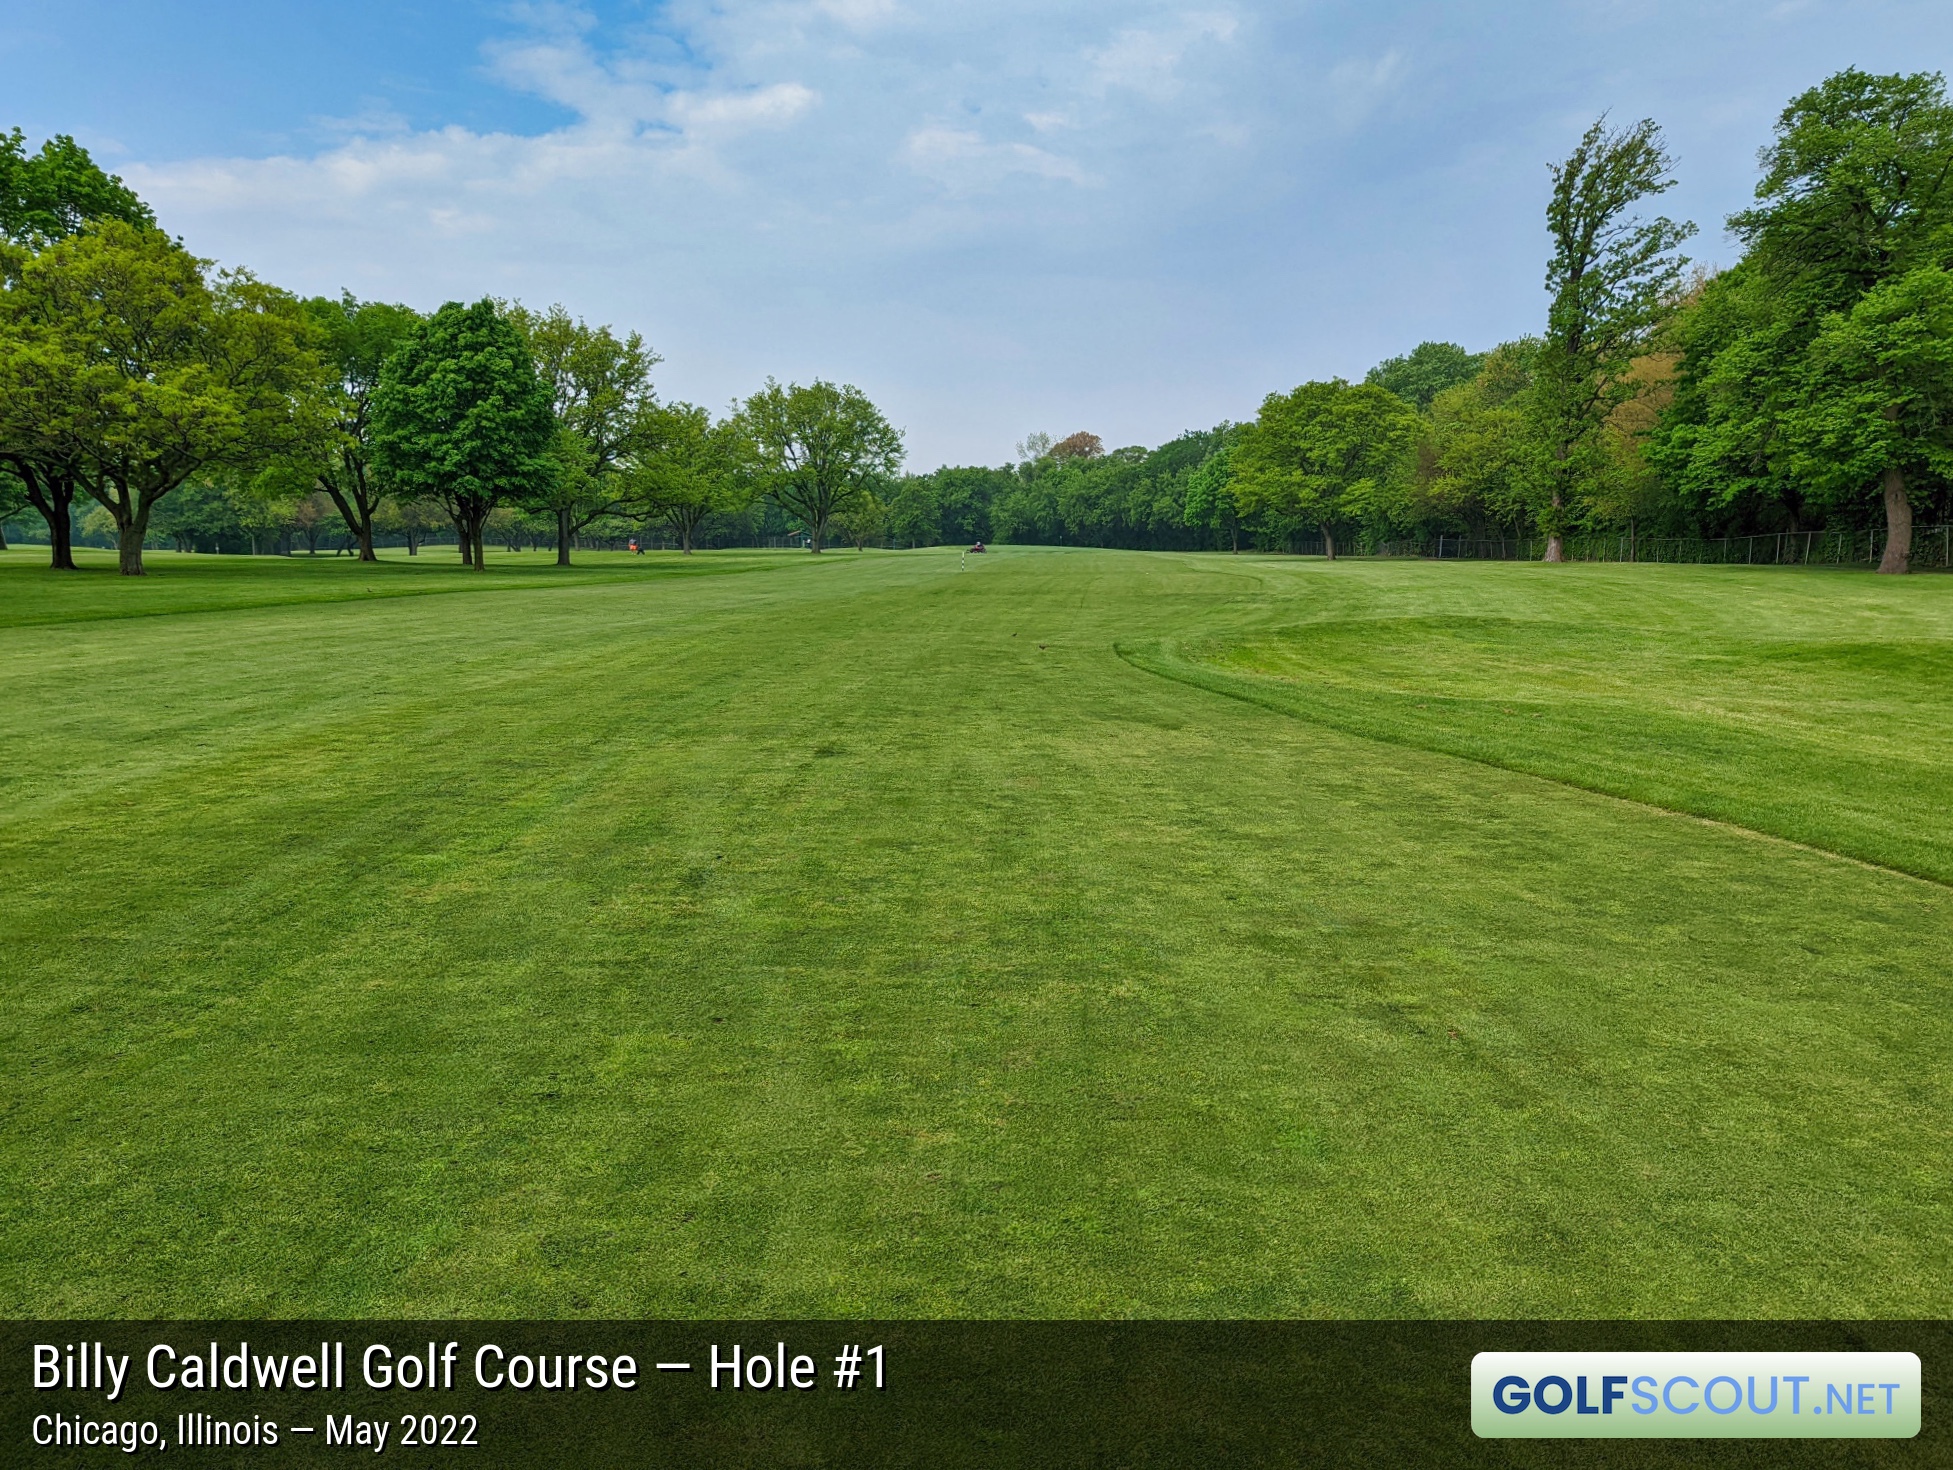 Photo of hole #1 at Billy Caldwell Golf Course in Chicago, Illinois. 